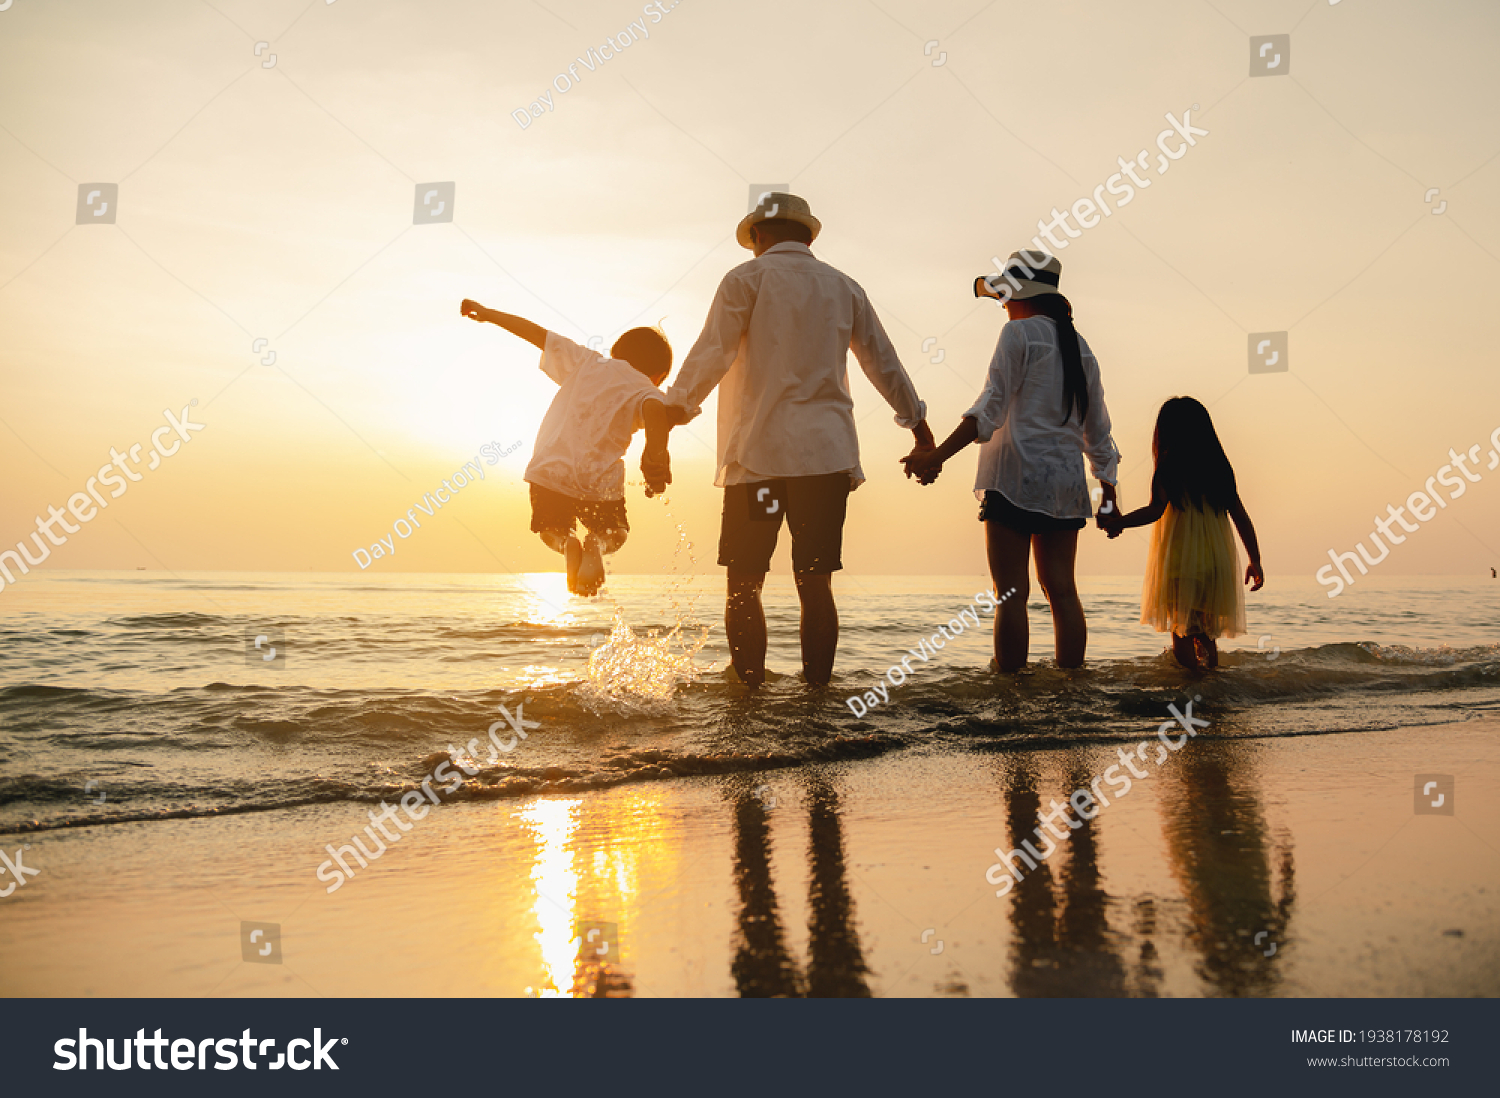 Happy asian family jumping together on the beach in holiday. Silhouette of the family holding hands enjoying the sunset on the  beach.Happy family travel and vacations concept.  #1938178192